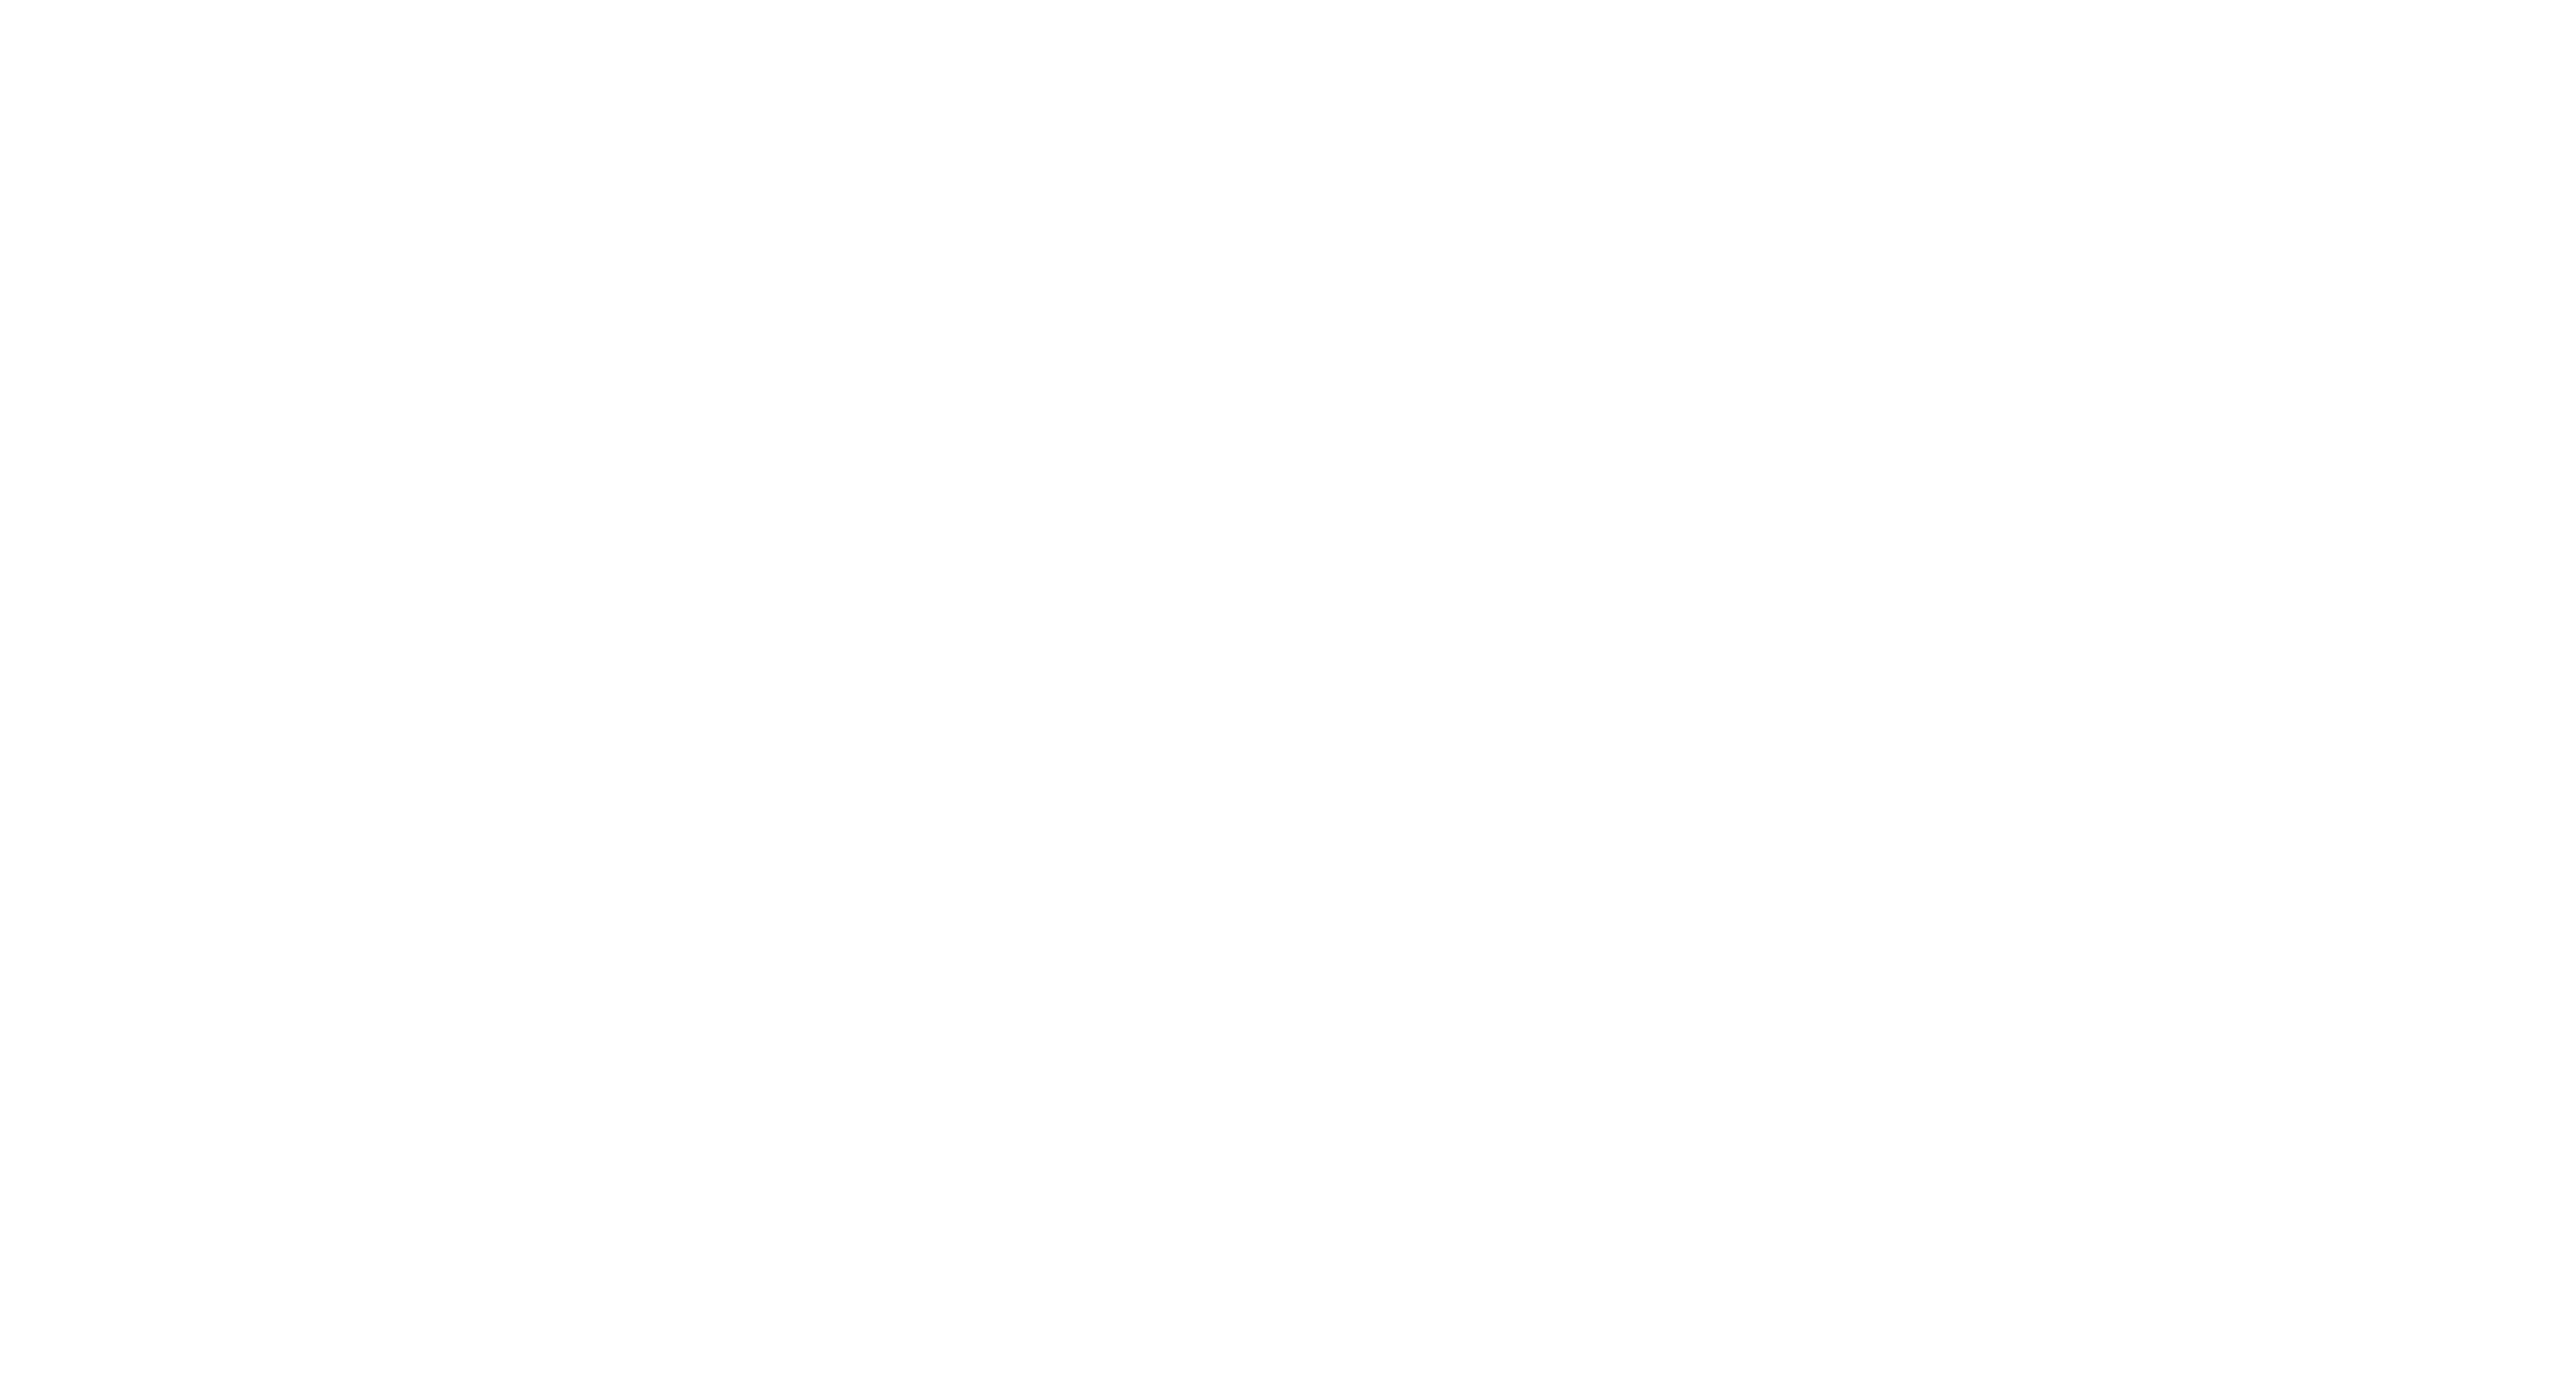 Safer + Simpler St. Louis County